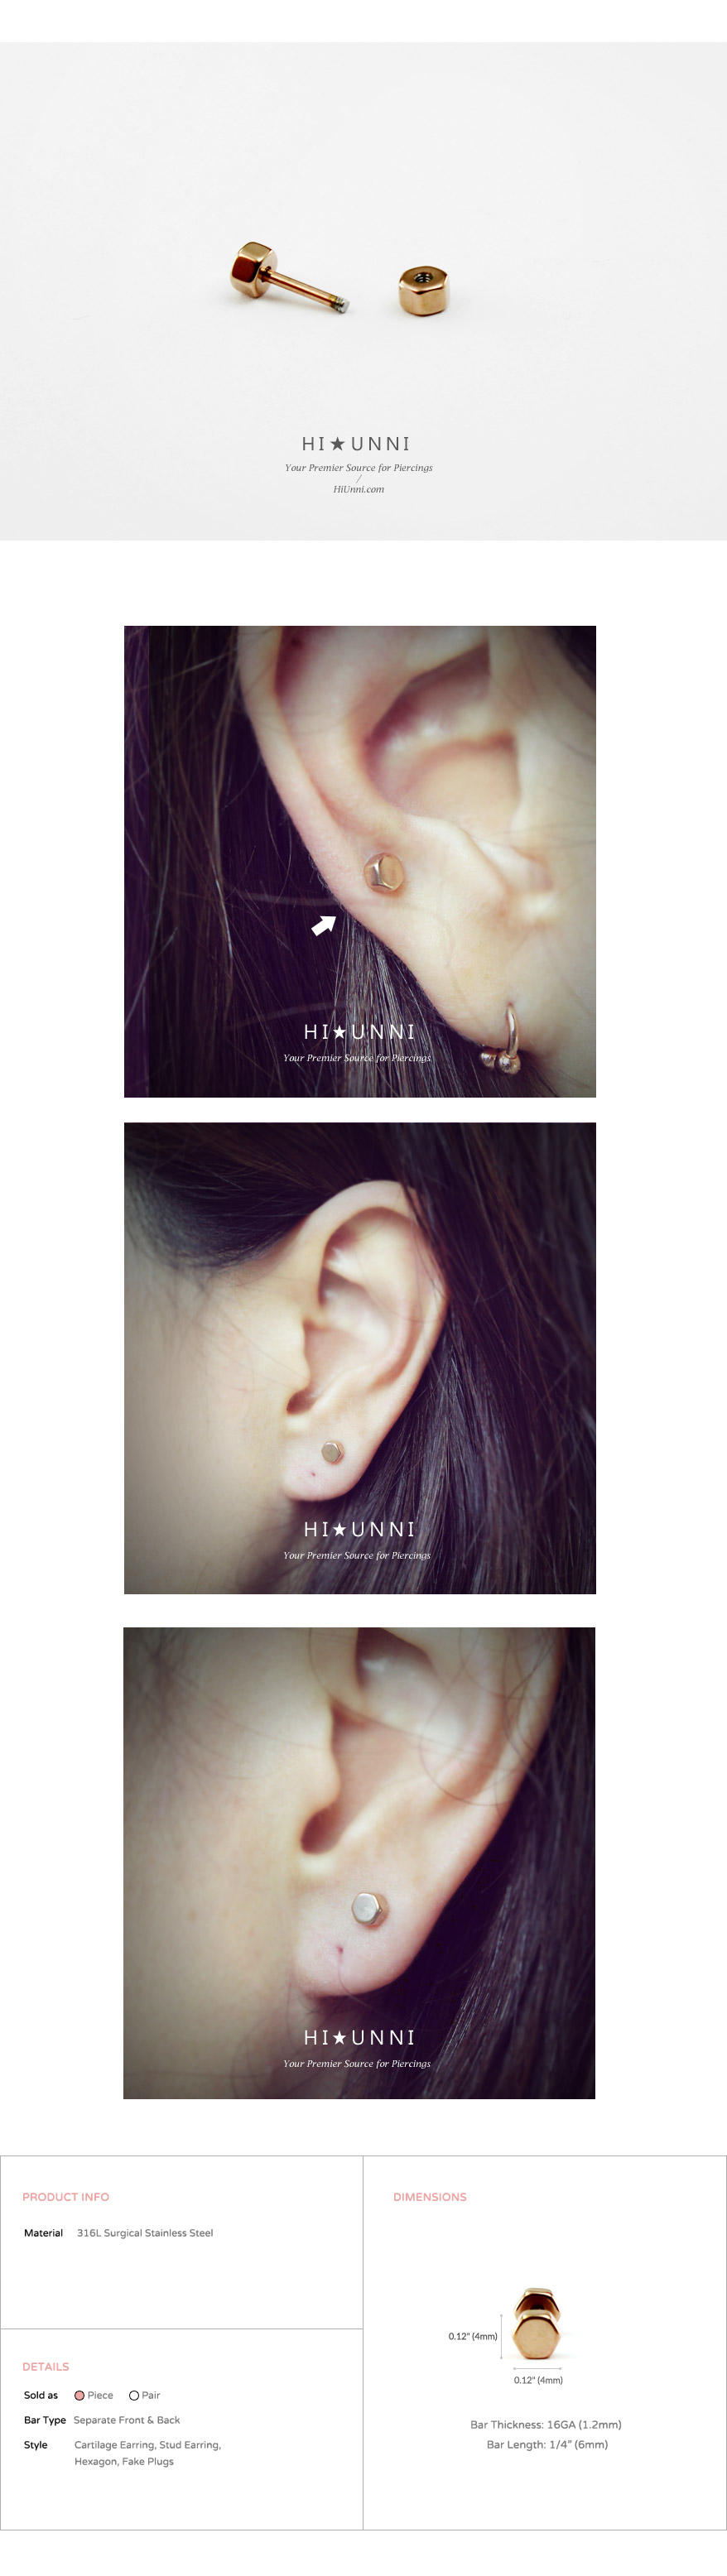 ear_studs_piercing_Cartilage_earrings_16g_316l_Surgical_Stainless_Steel_korean_asian_style_jewelry_fake_plug_Gauge_cheaters_hexagon_3